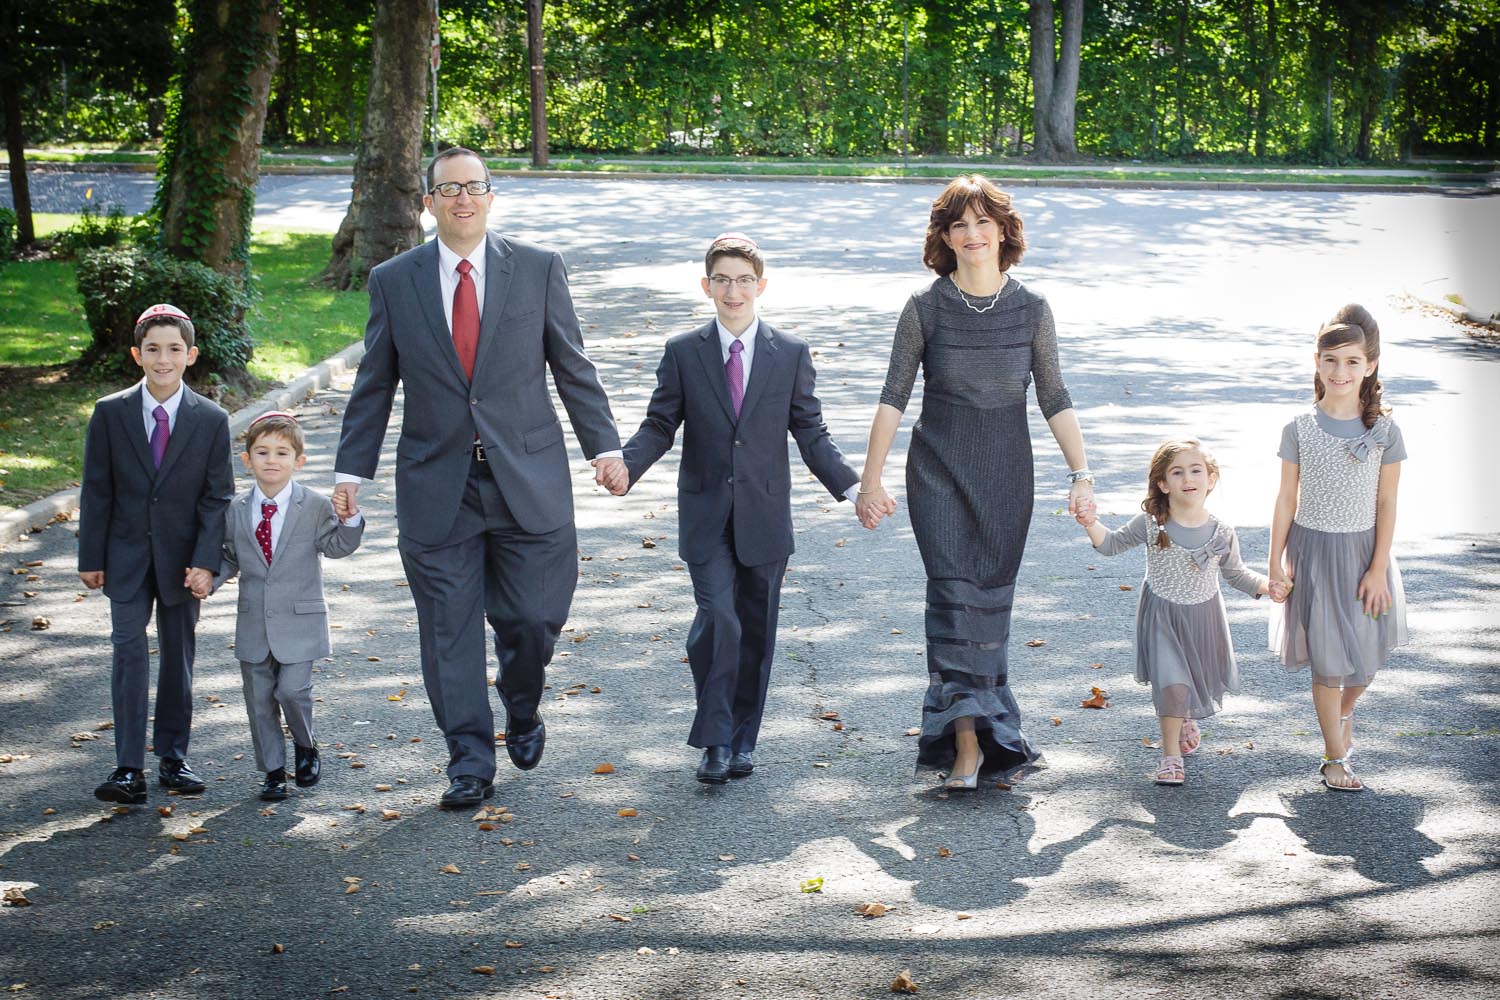 bar mitzvah and family walking on street